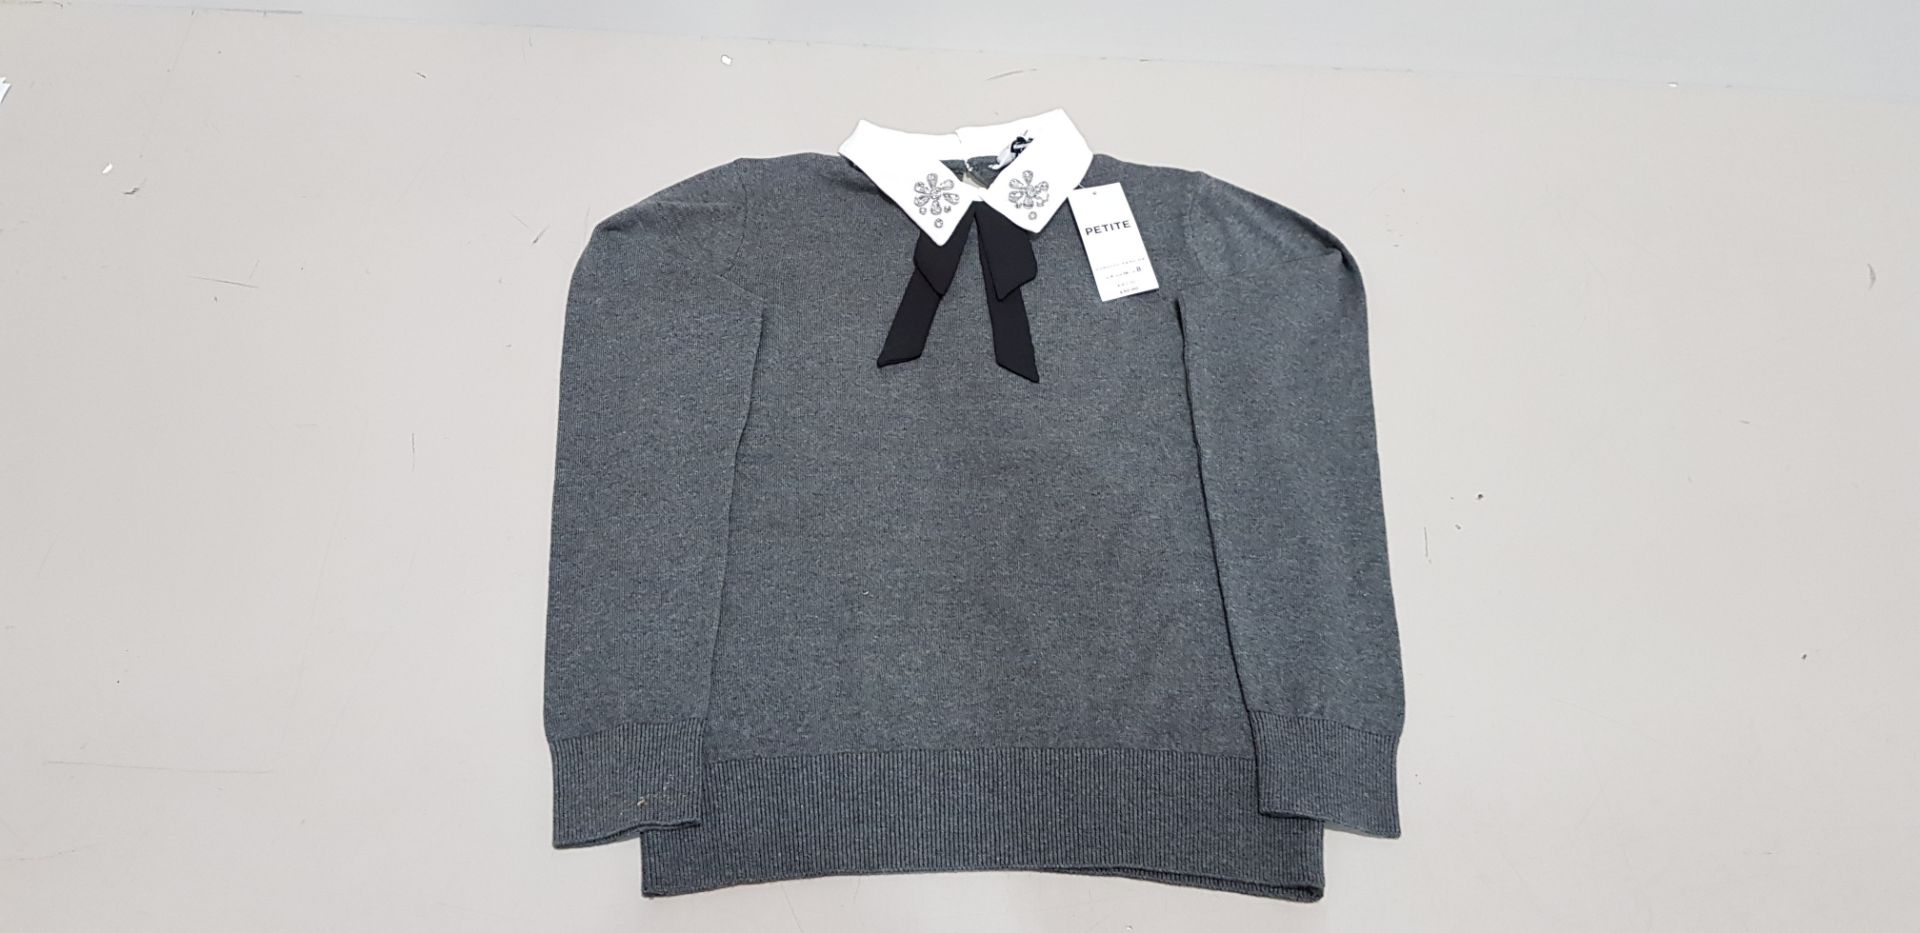 20 X BRAND NEW DOROTHY PERKINS PETITE GREY SWEATERS WITH WHITE COLLAR AND EMBELLISHED CRYSTALS (